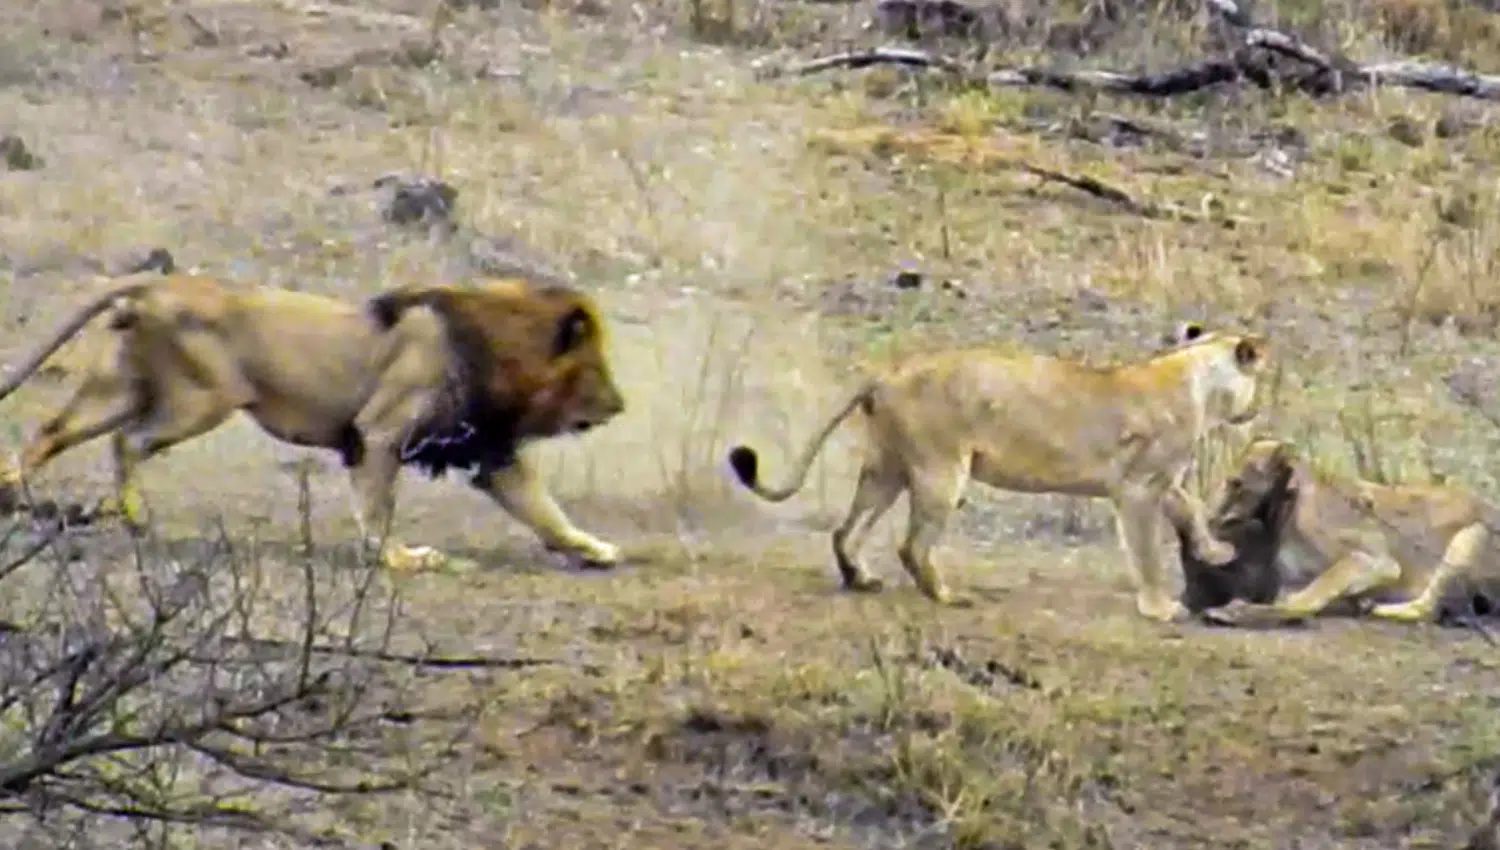 Male Lion Rescues Warthog from Other Lions